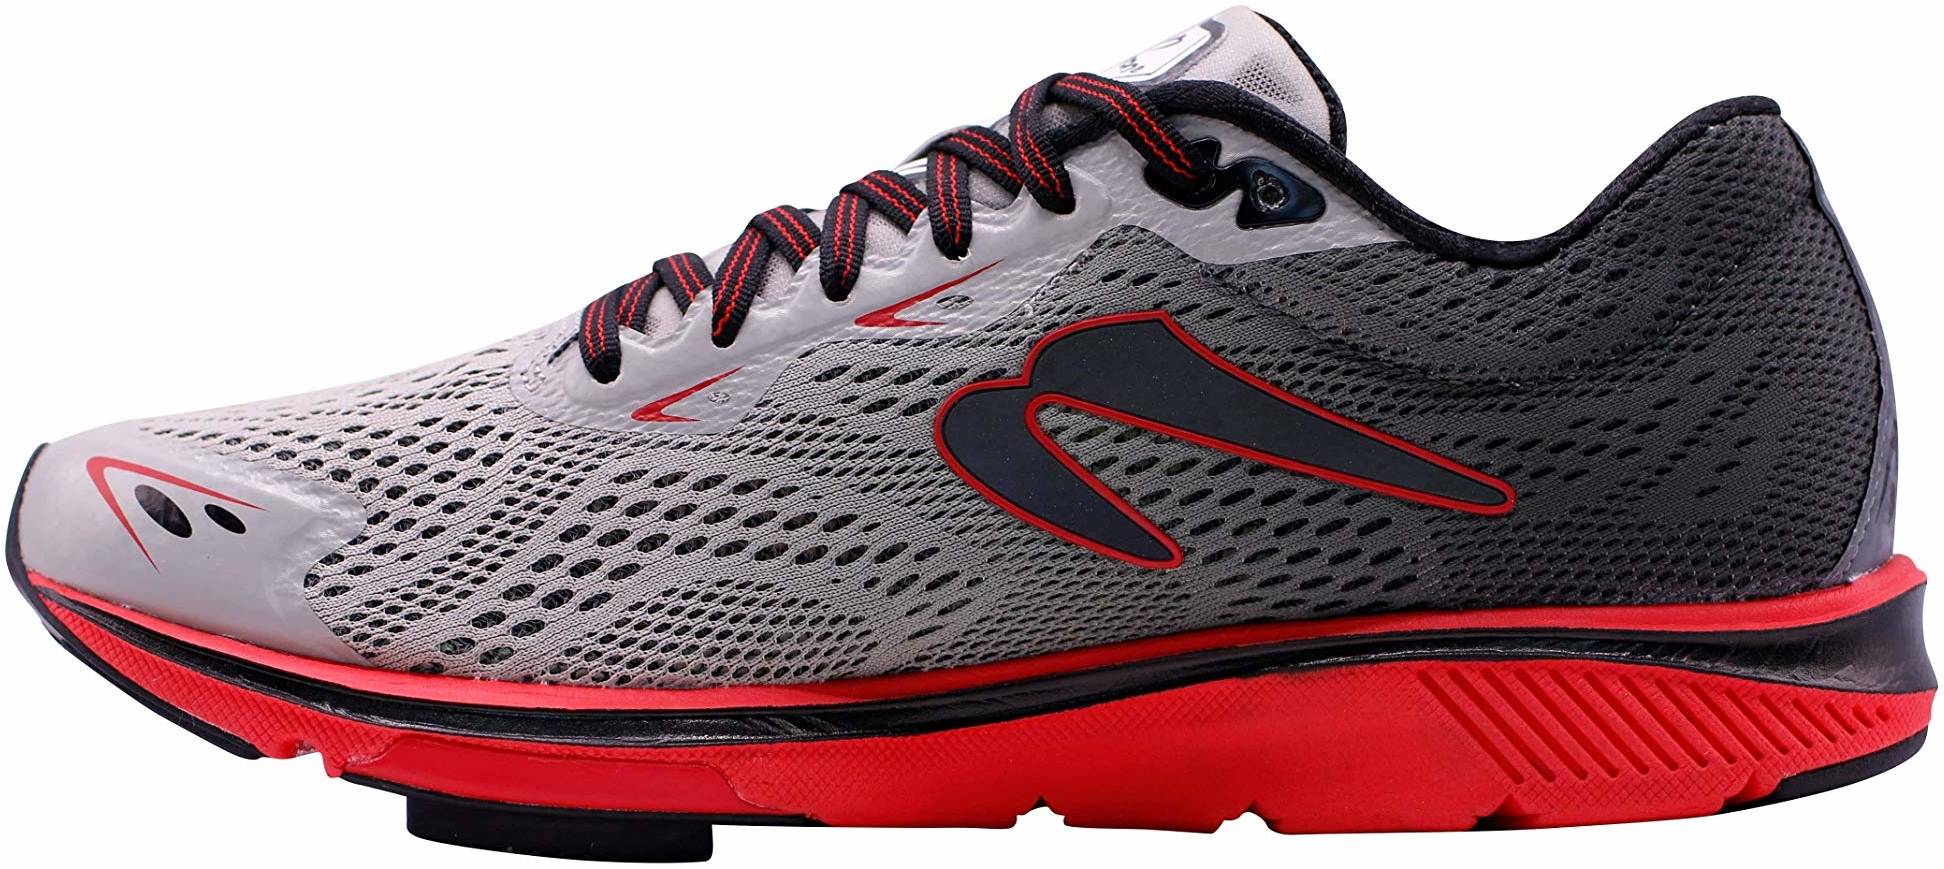 Save 31% on Newton Running Shoes (37 